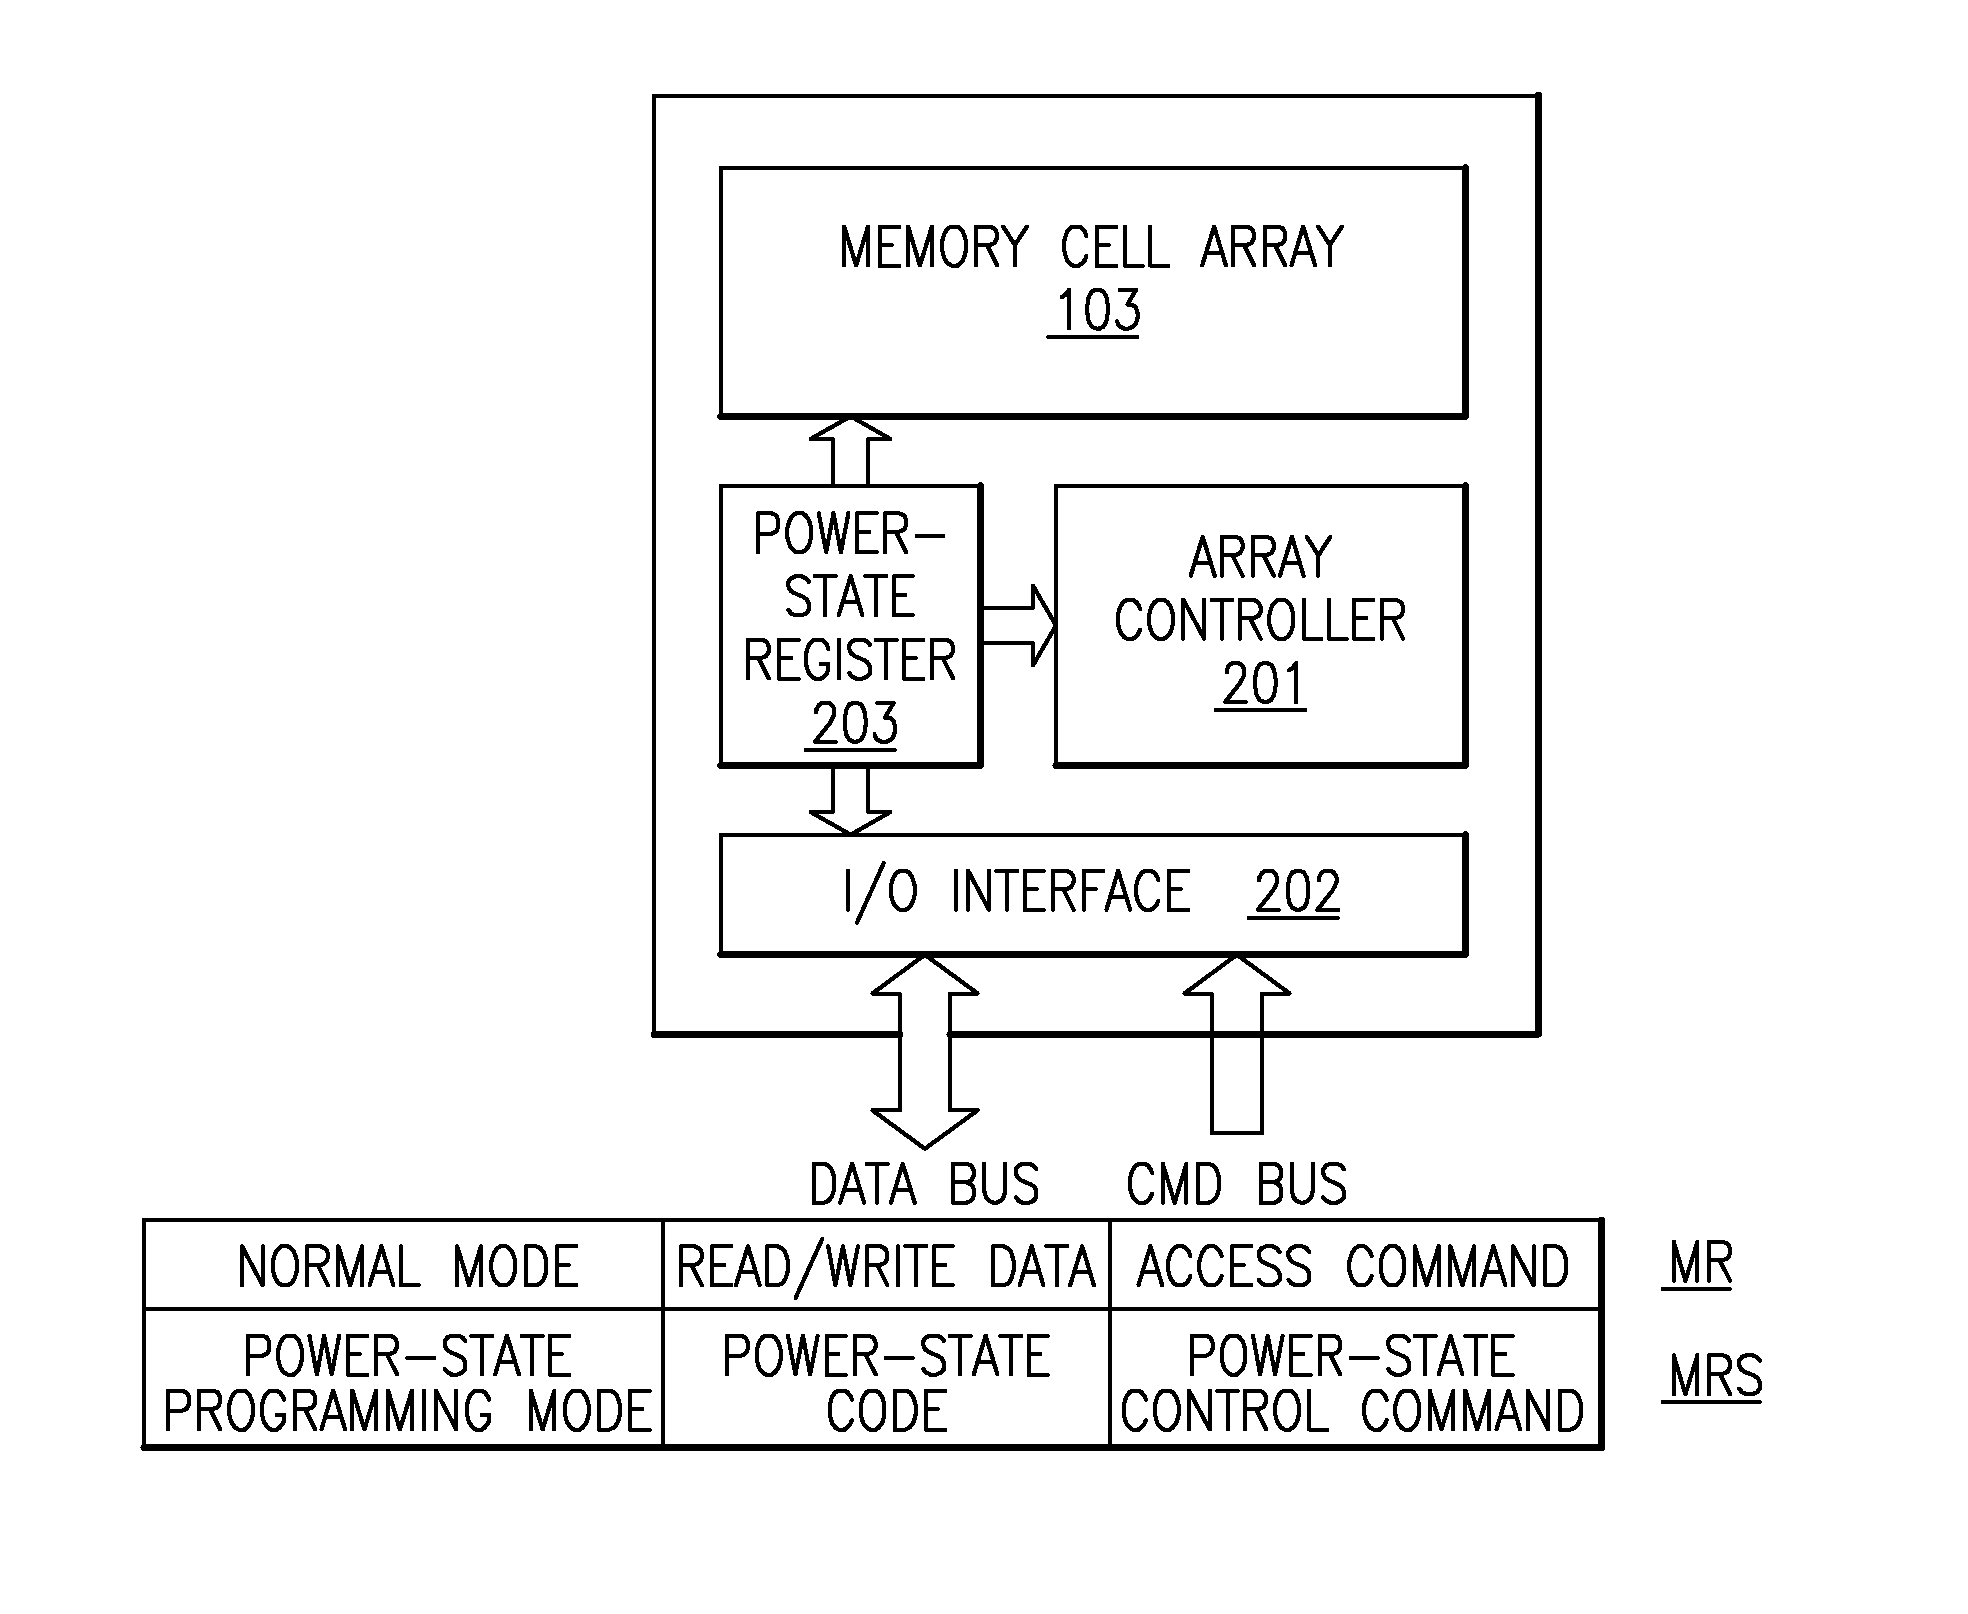 Power Management of a Spare DRAM on a Buffered DIMM by Issuing a Power On/Off Command to the DRAM Device